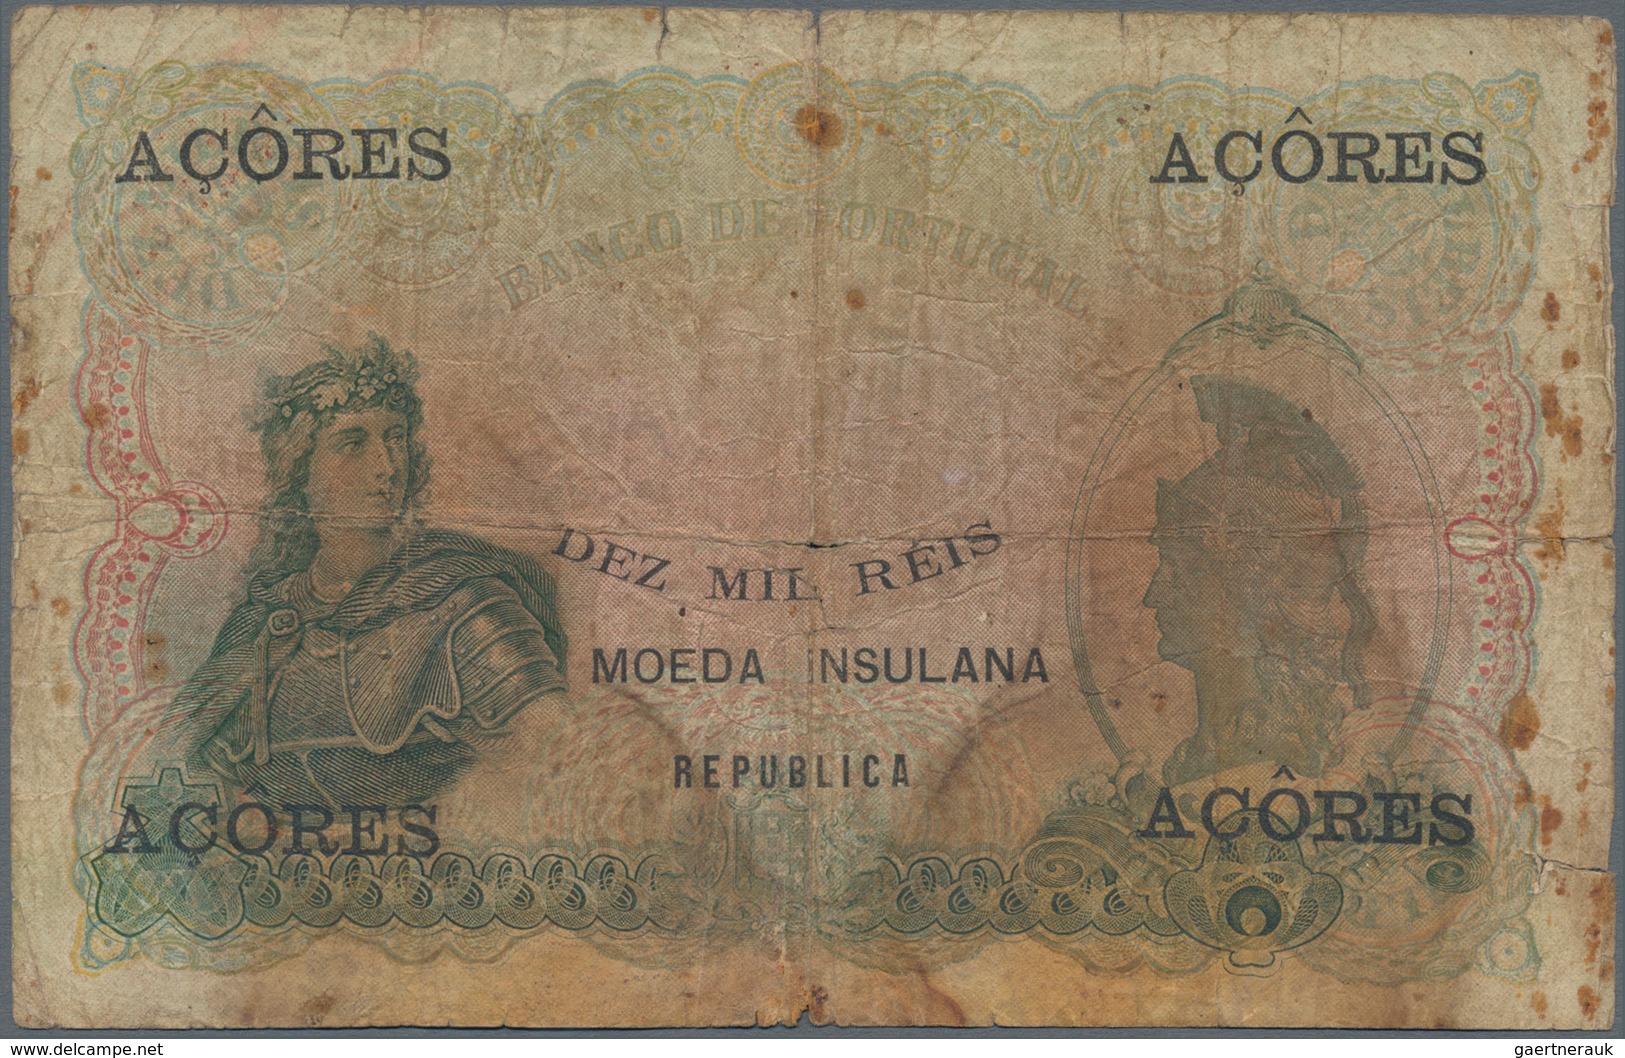 Azores / Azoren: Banco De Portugal 10 Mil Reis 1910 With Overprint "AZORES", P.12, Highly Rare Note - Portugal